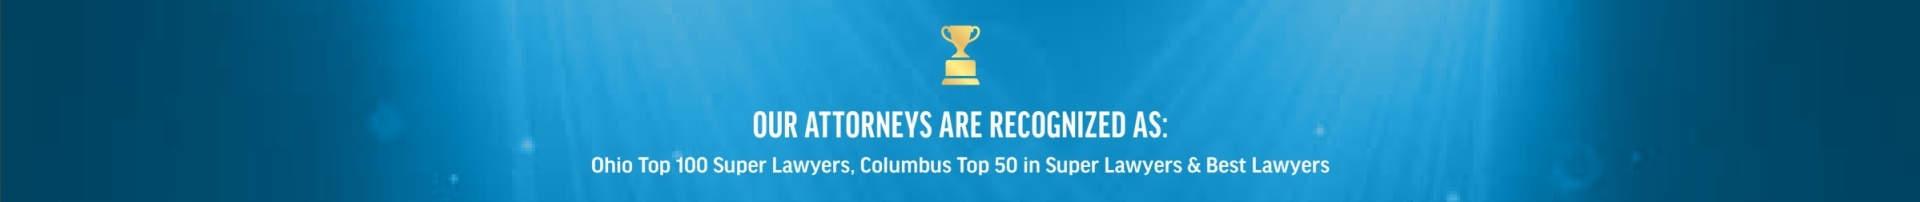 Our attorneys are recognized as: Ohio Top 100 Super Lawyers, Columbus Top 50 in Super Lawyers & Best Lawyers